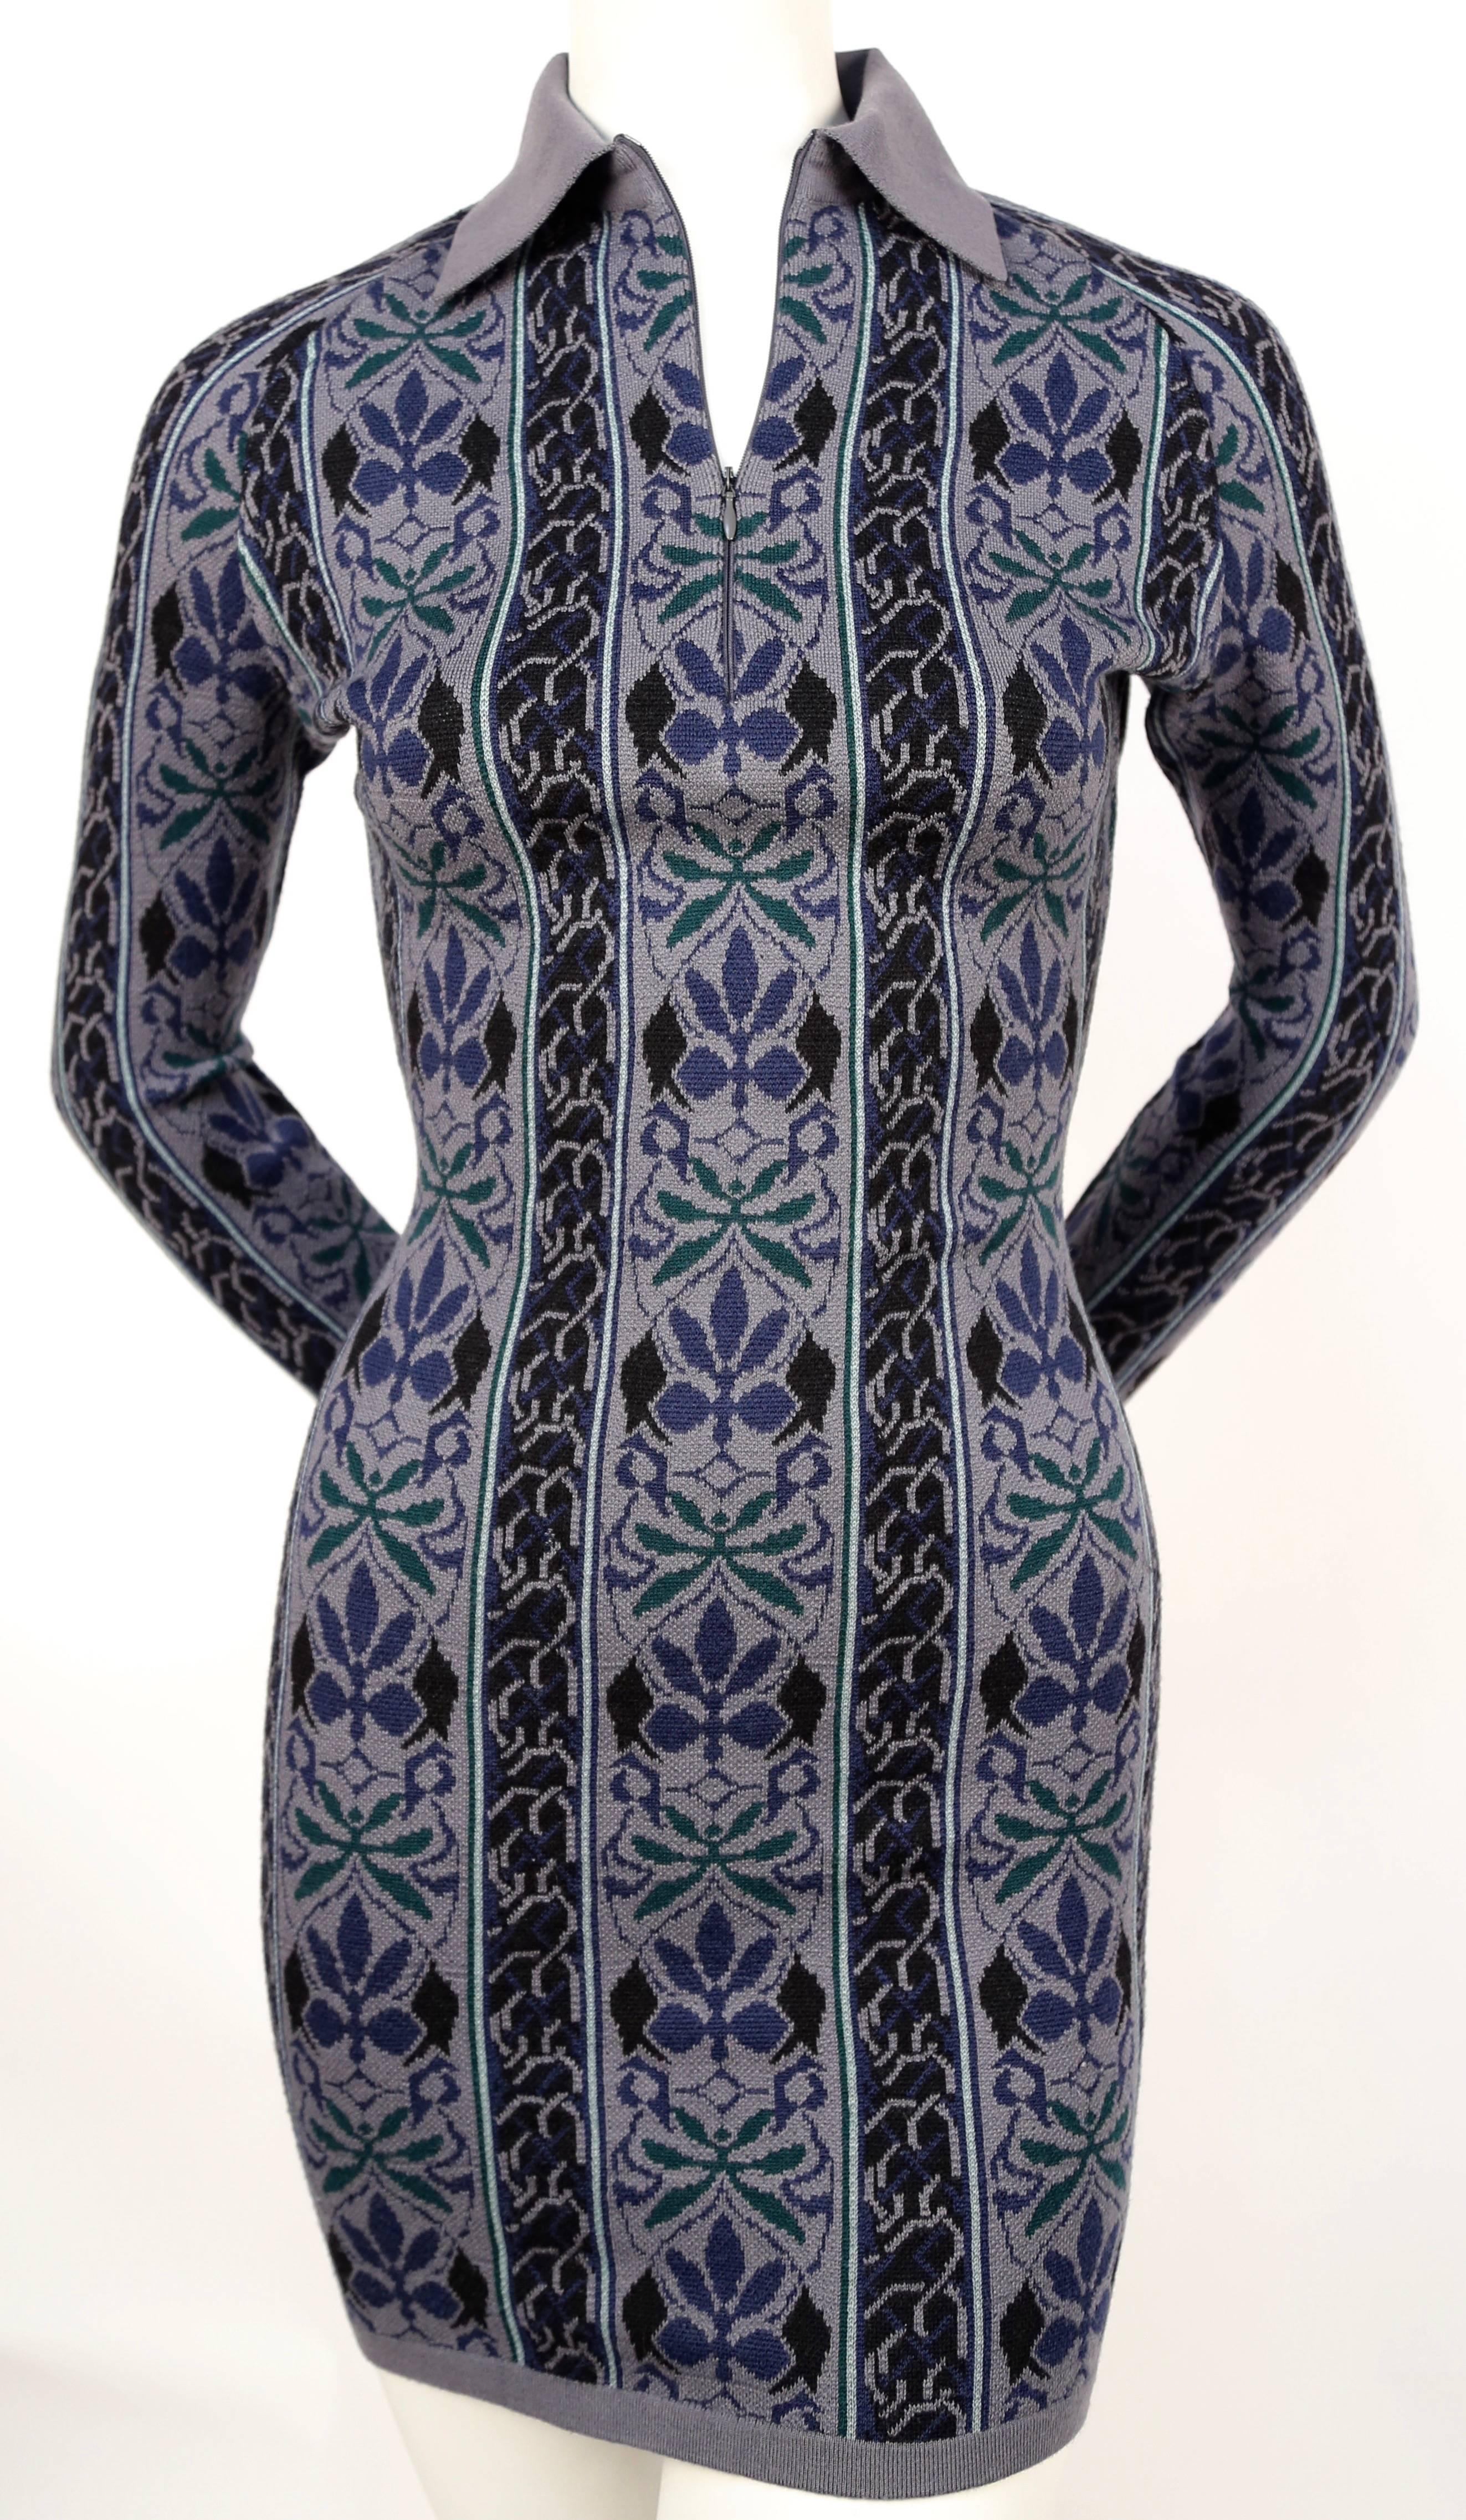 Very rare knit dress with woven abstract floral motif designed by Azzedine Alaia dating to fall of 1990. Size M however this would better suit a S. Approximate measurements (unstretched): shoulder 14